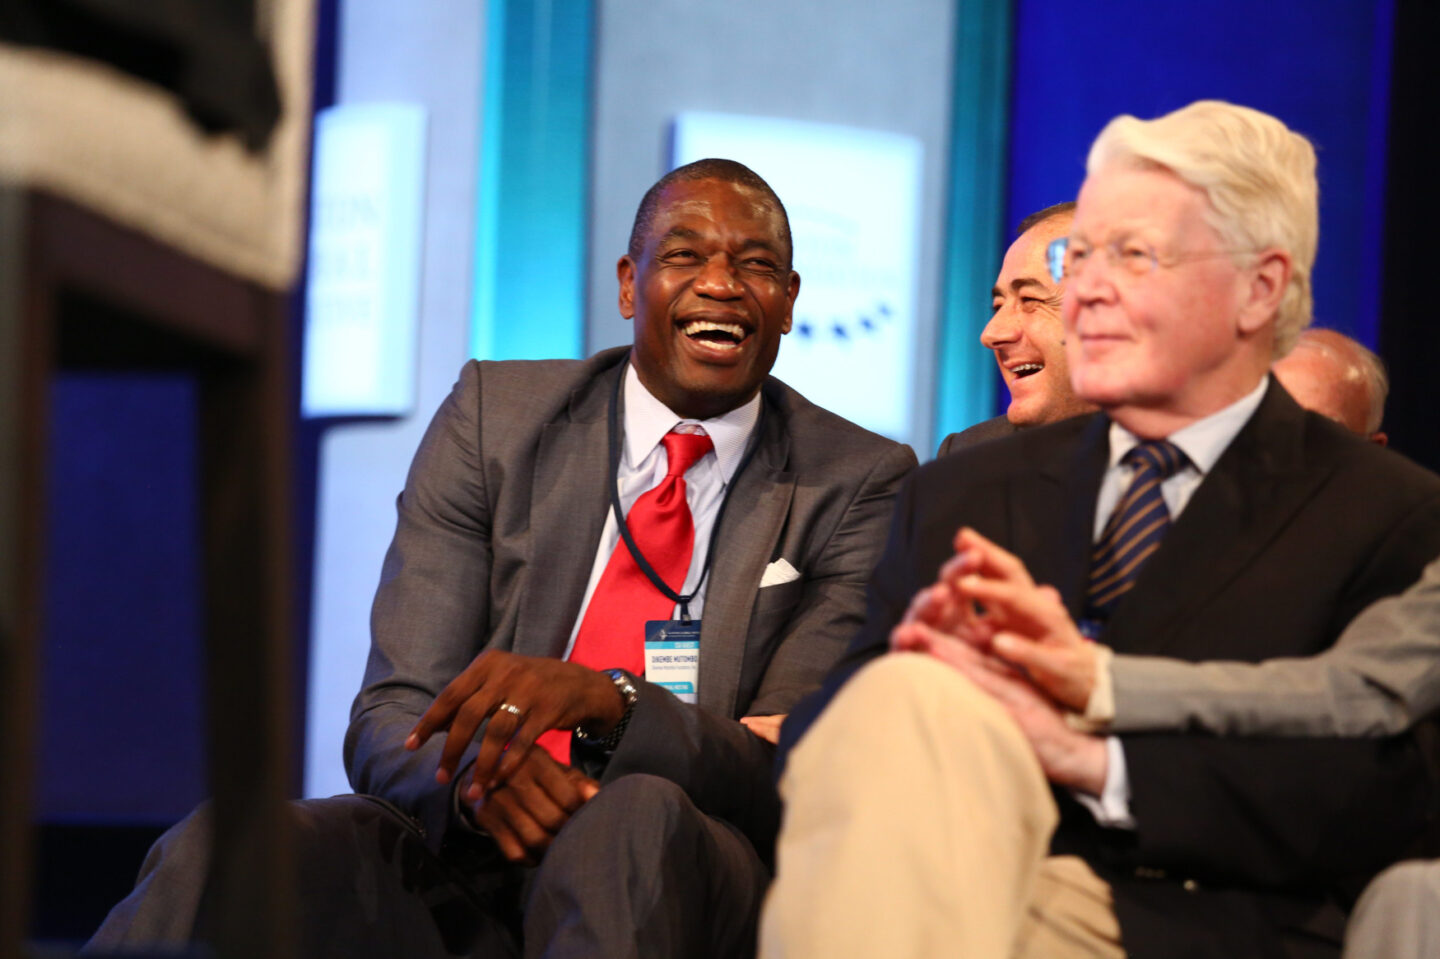 Dikembe Mutombo laughs during a plenary session